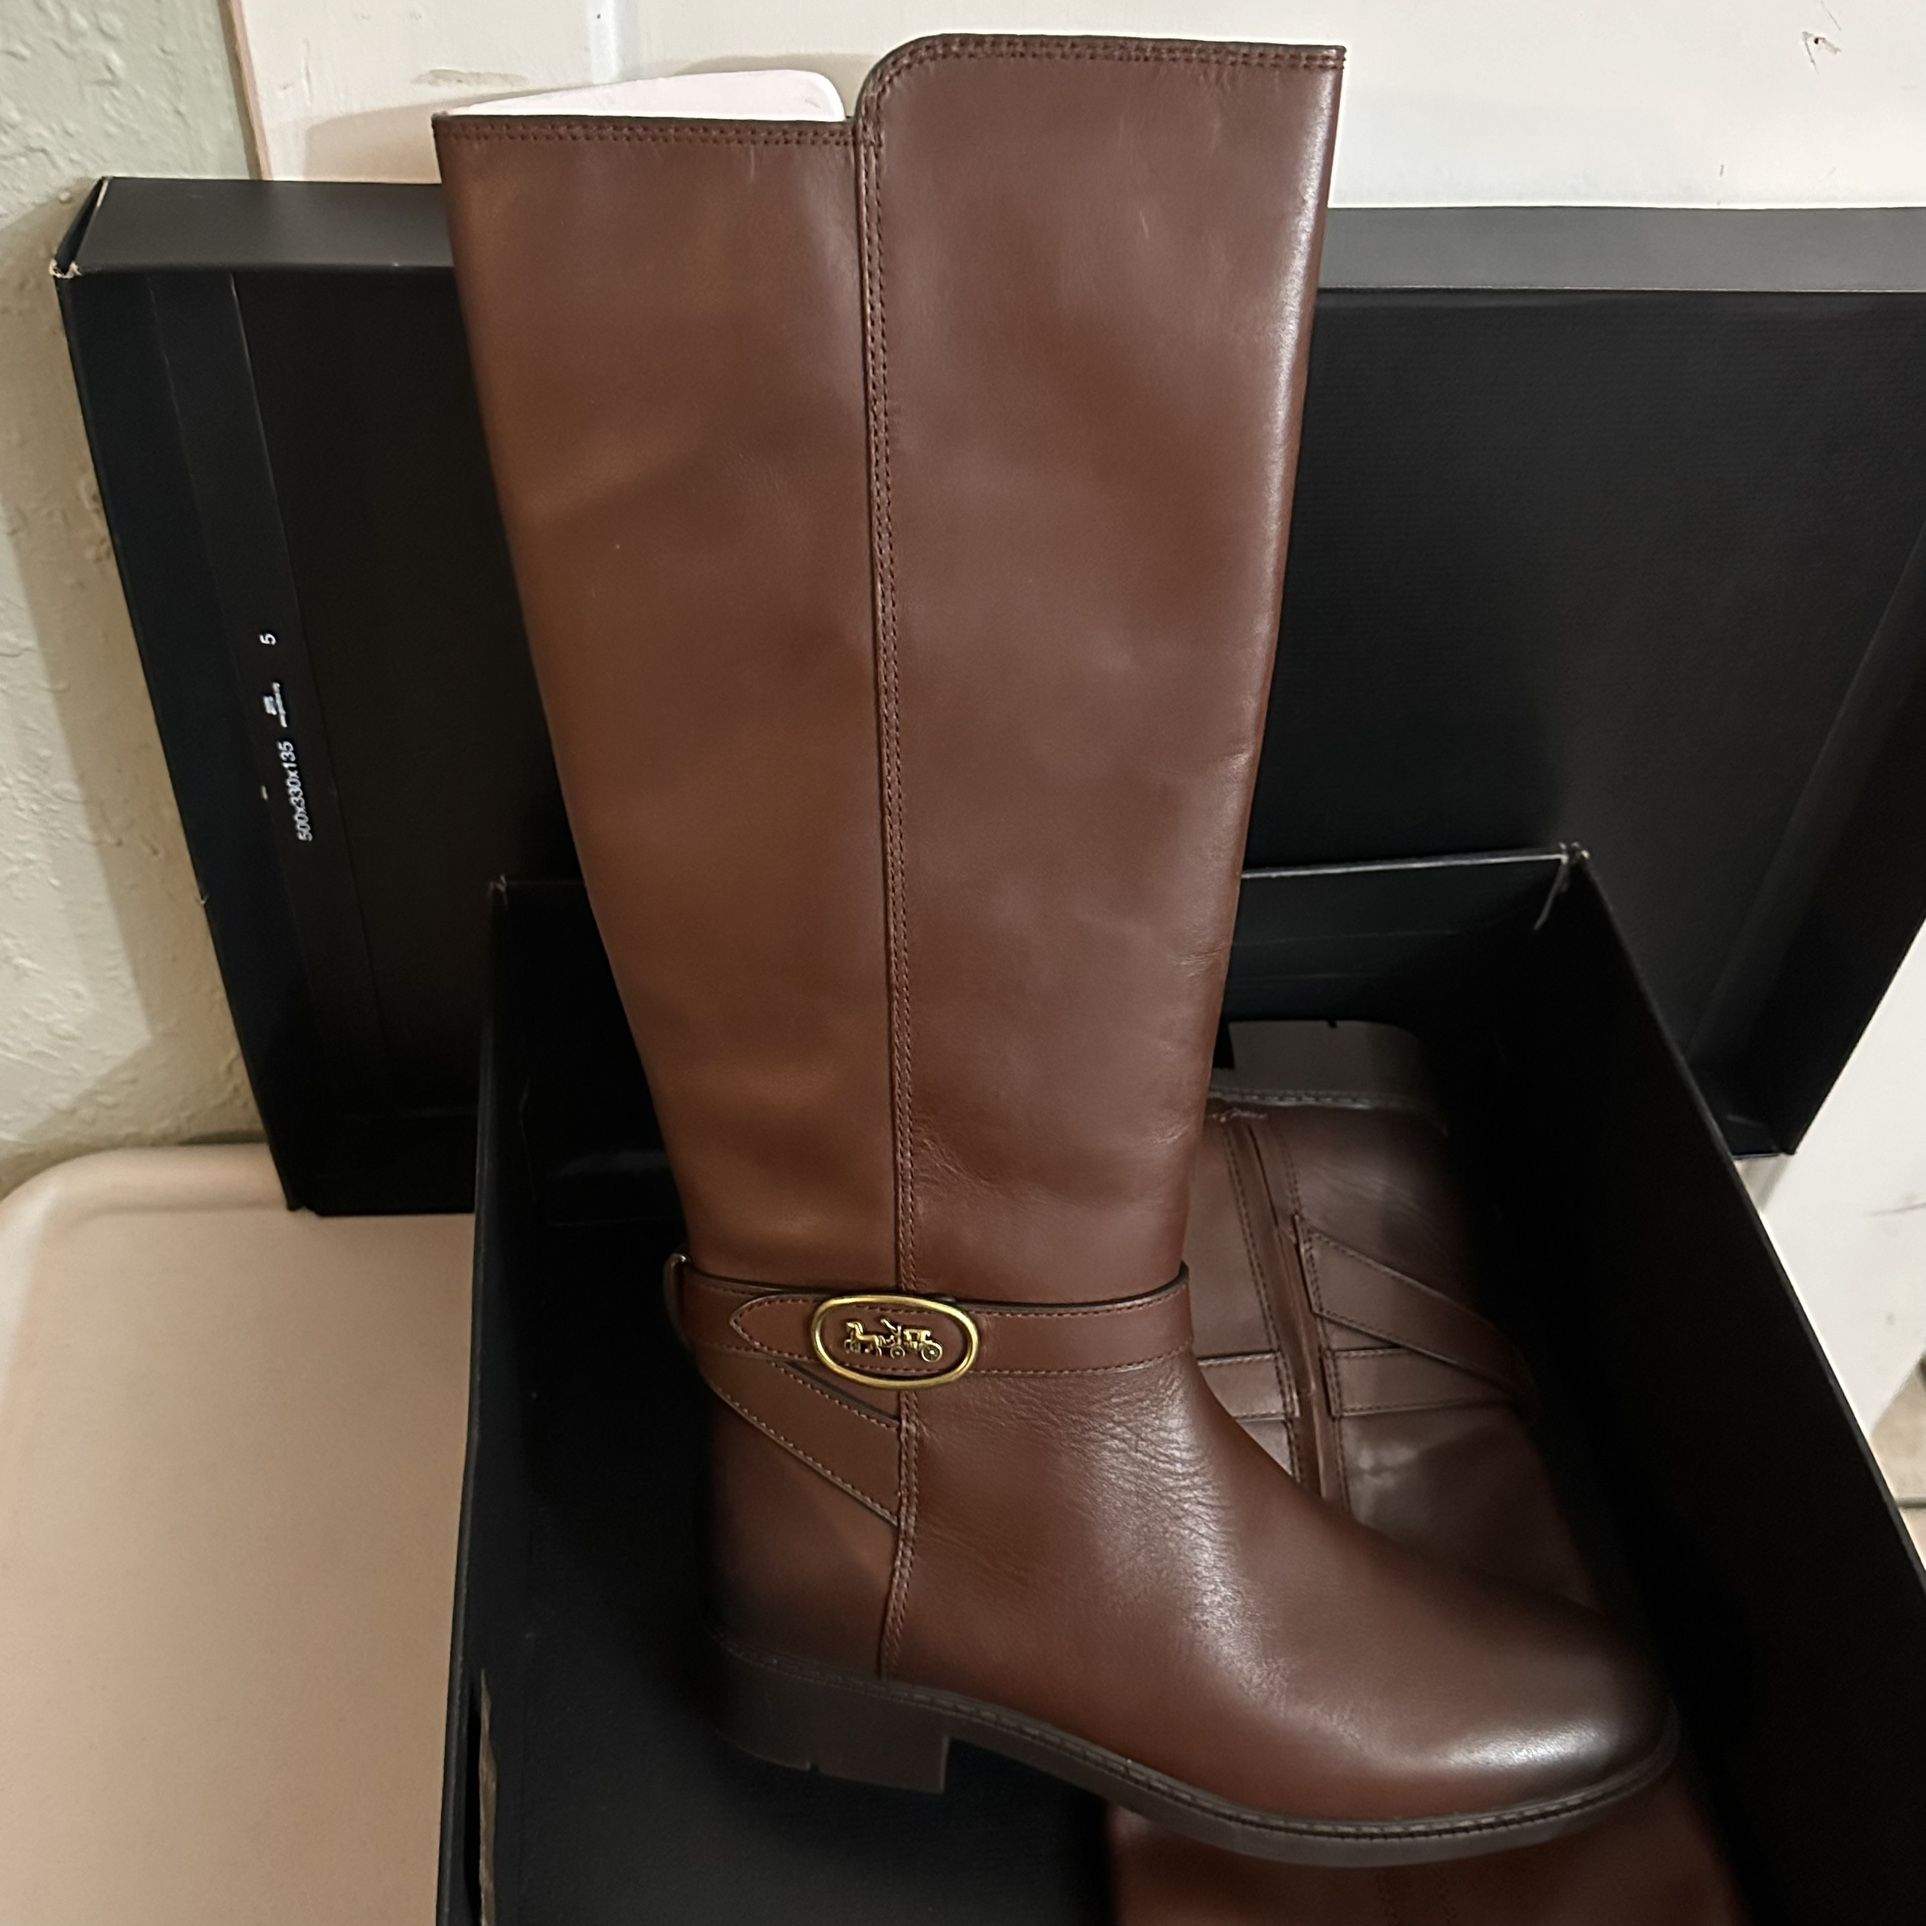 new coach boots Size 7